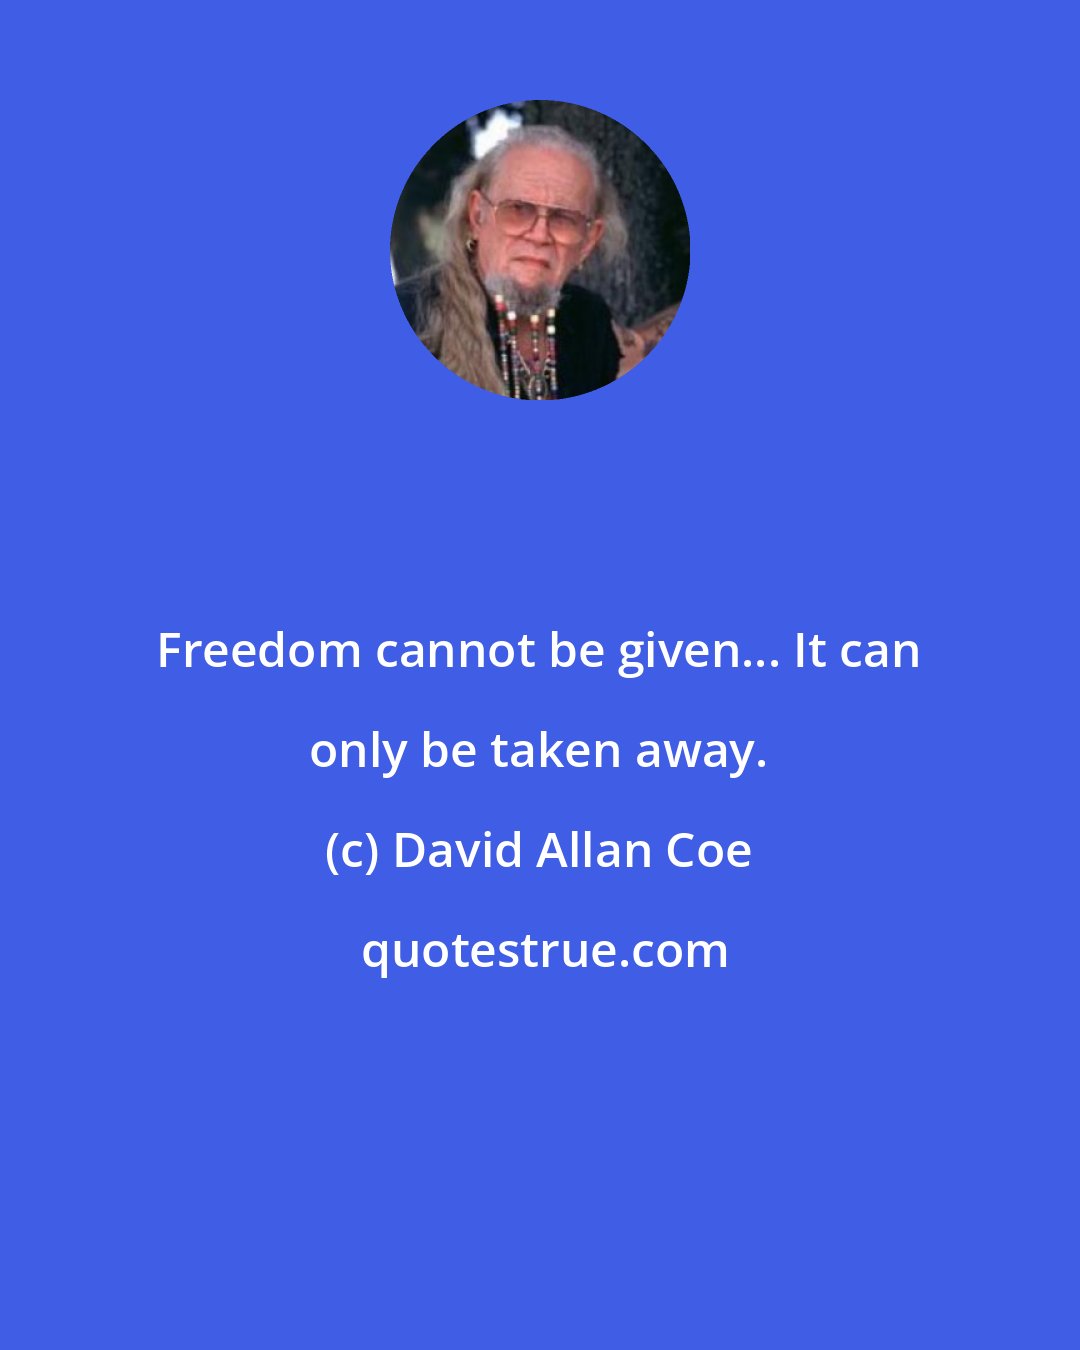 David Allan Coe: Freedom cannot be given... It can only be taken away.